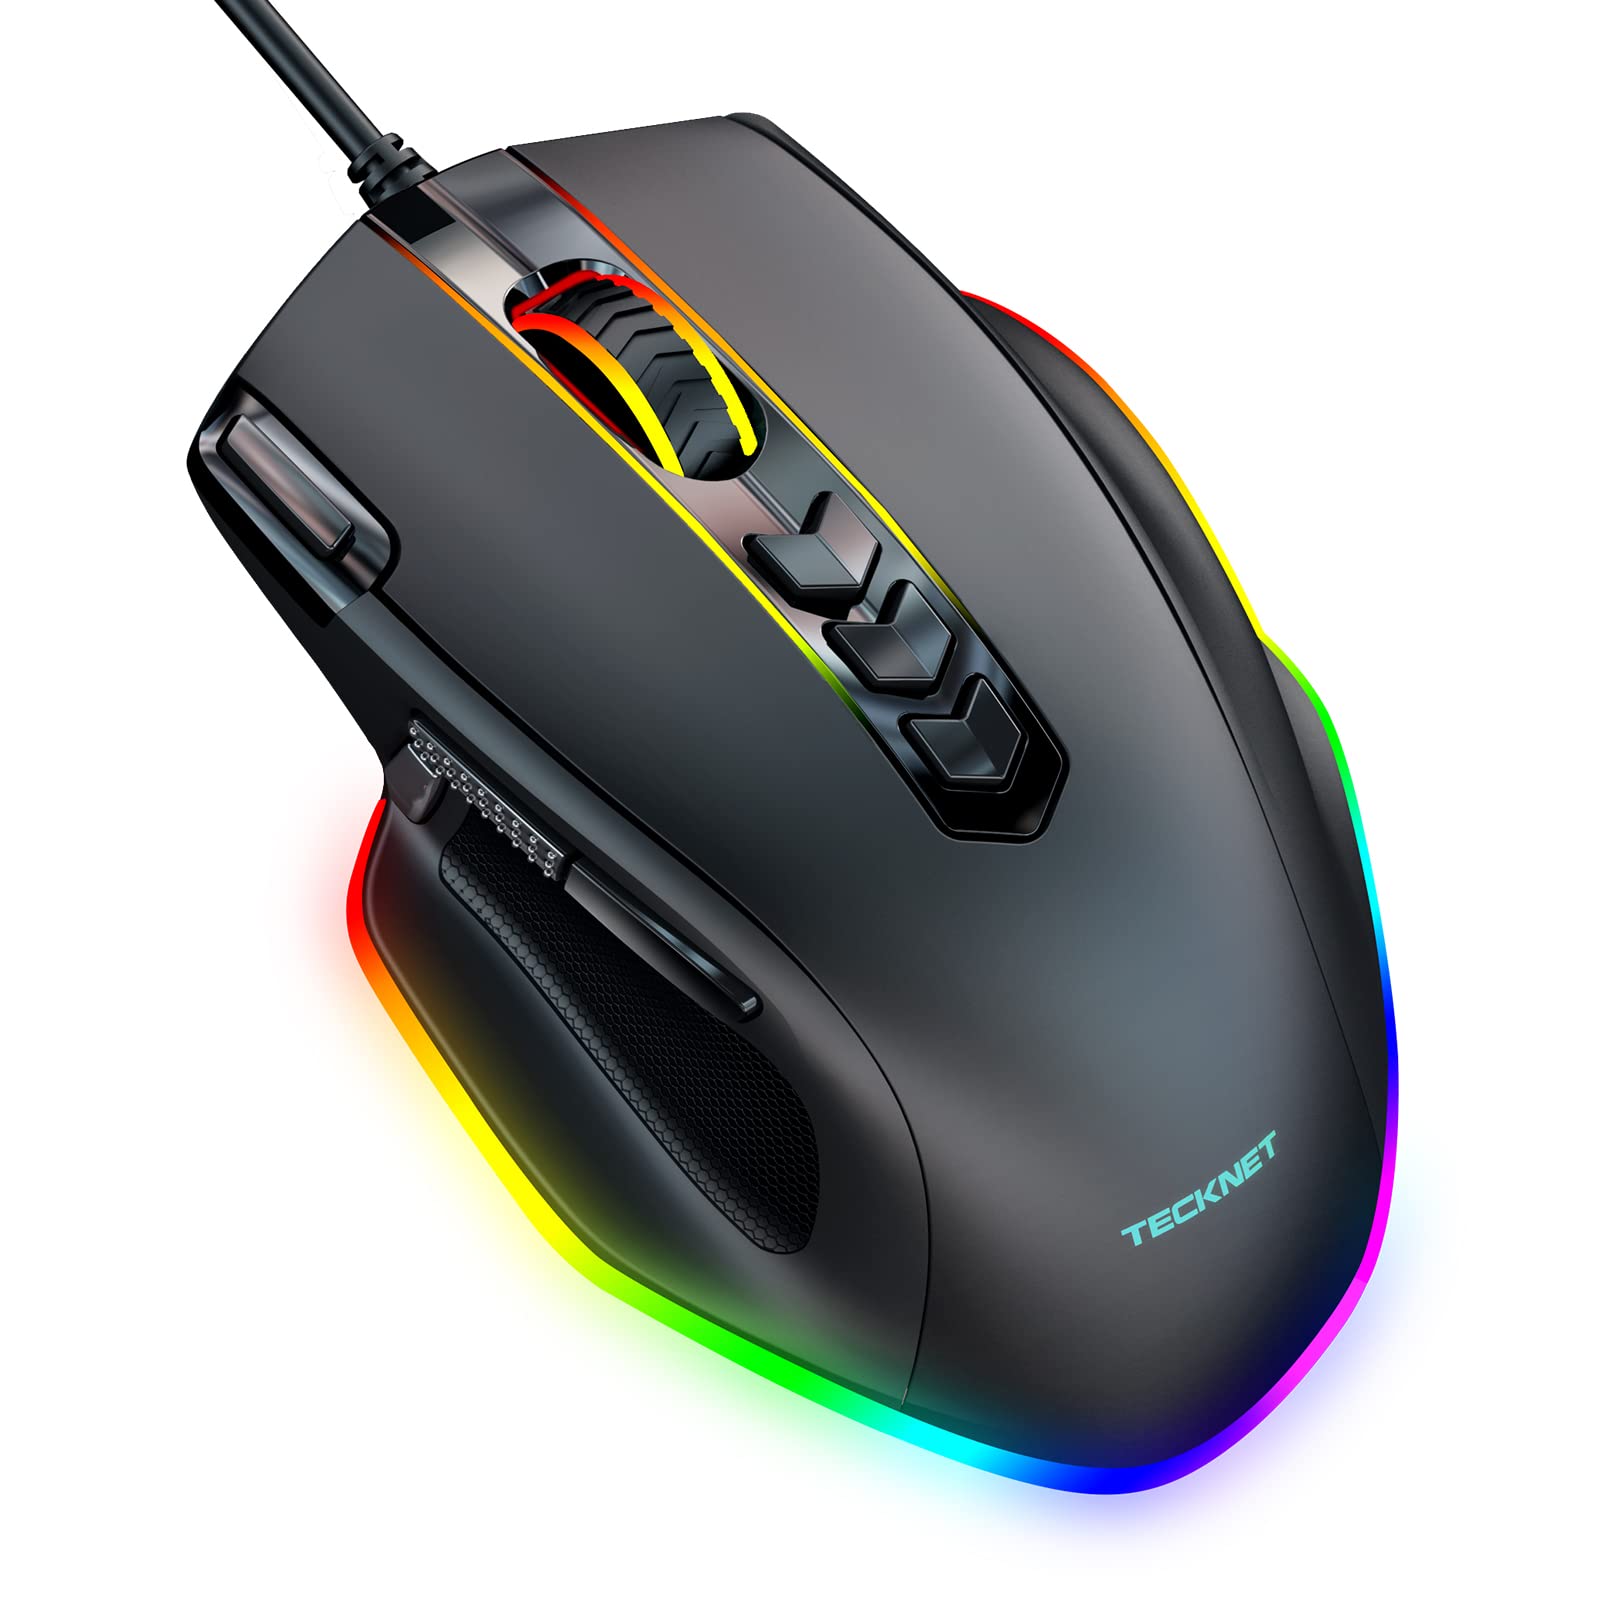 TECKNET Wired Gaming Mouse, Ergonomic Gaming Mouse with 8000DPI, RGB Computer Mice with 11 Programmable Buttons, PC Gaming Mice for Notebook Laptop Mac Book, Fire Button(Ratón de juego)